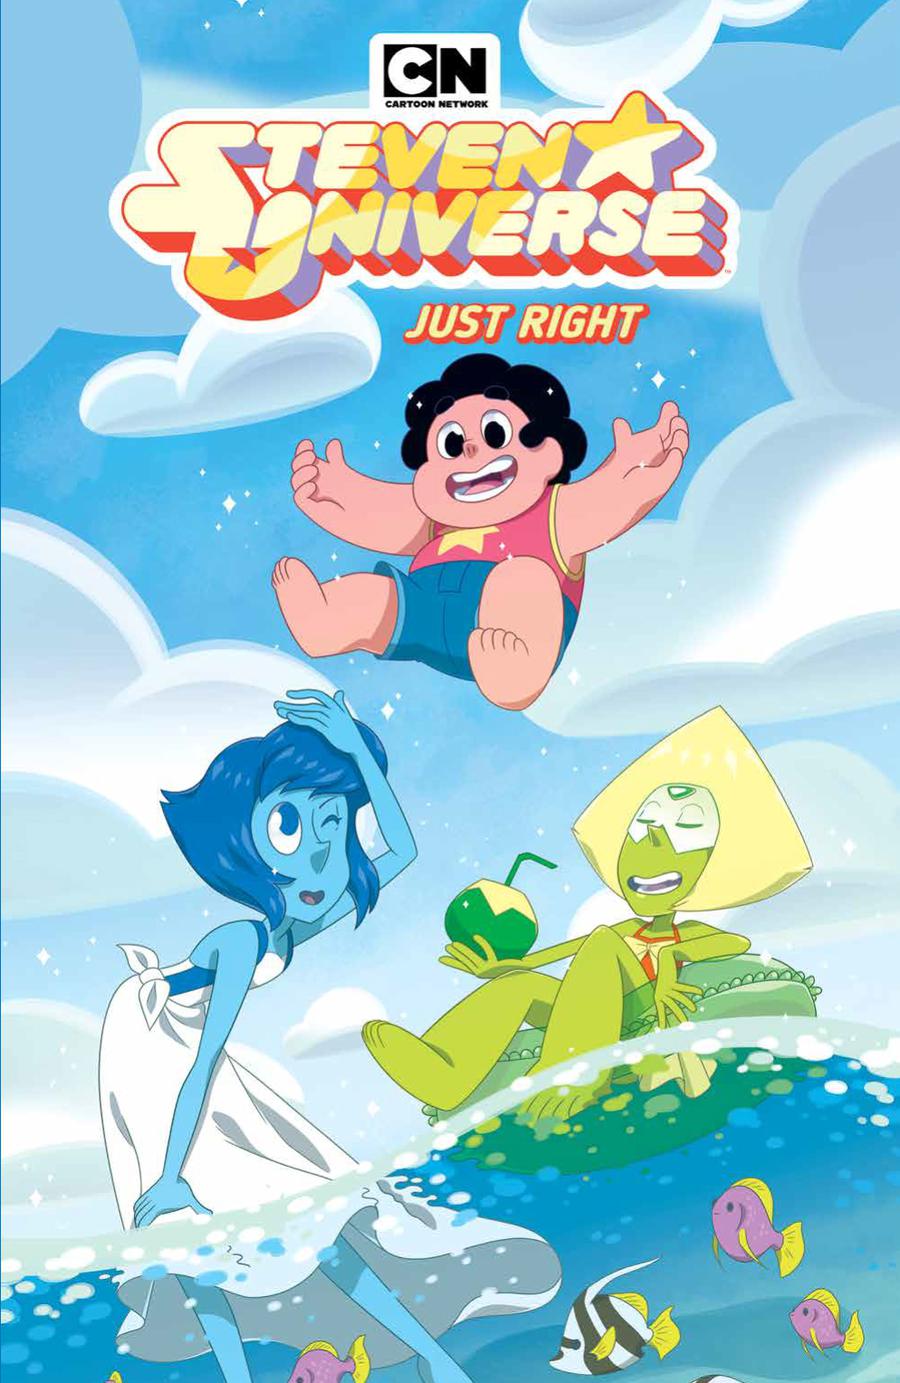 Steven Universe Ongoing Vol 4 Just Right TP